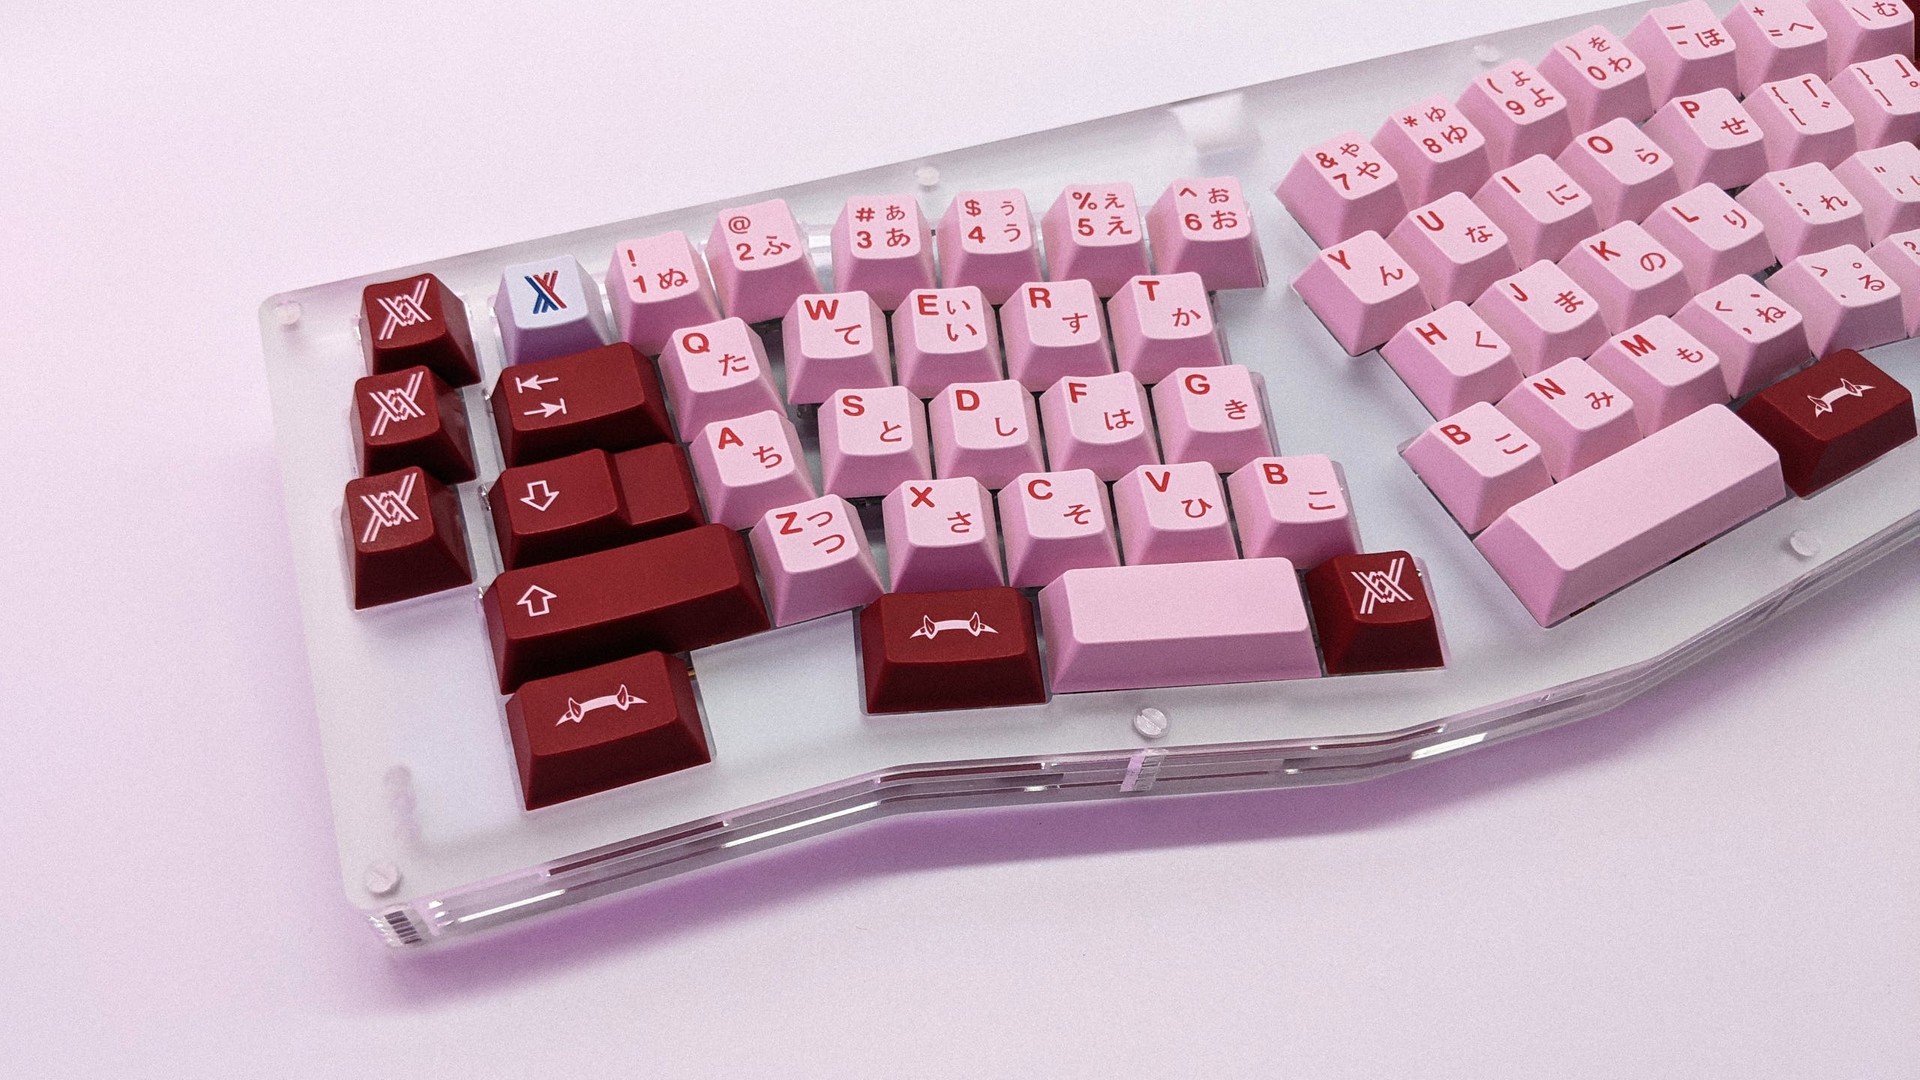 red and pink keycaps with hiragana/english alphas